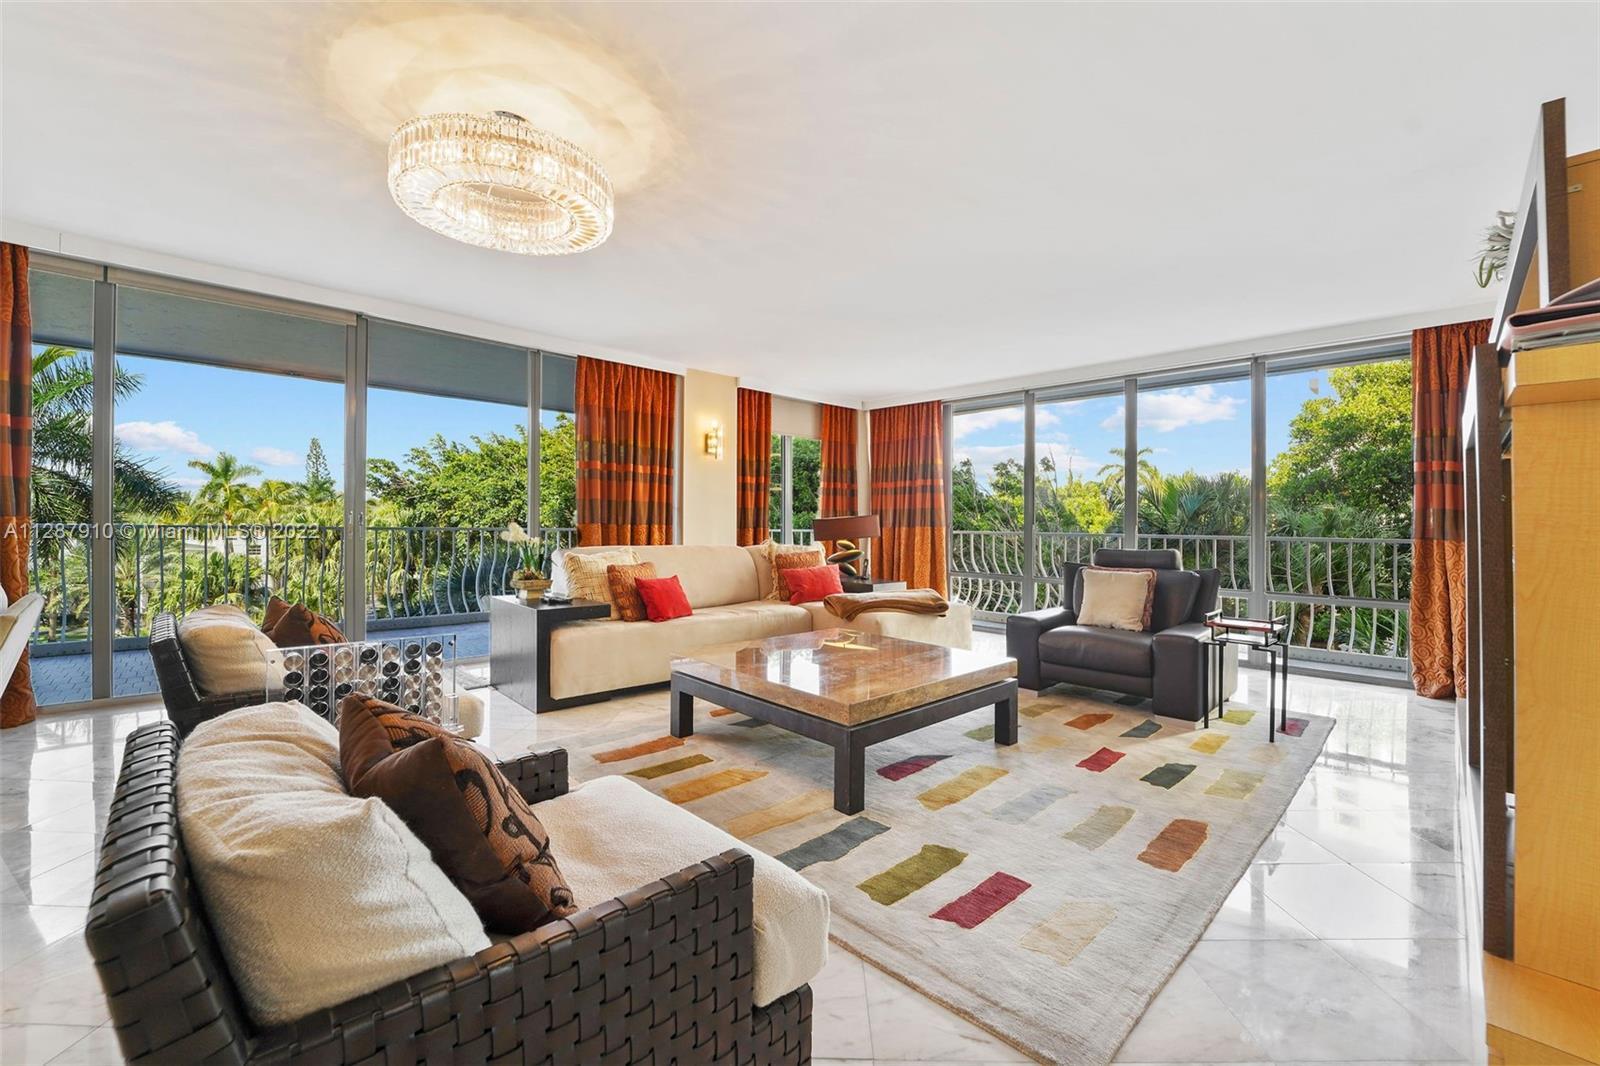 Located in the heart of Bal Harbour, this luxurious residence offers 3,300 Sqft of living space, inc